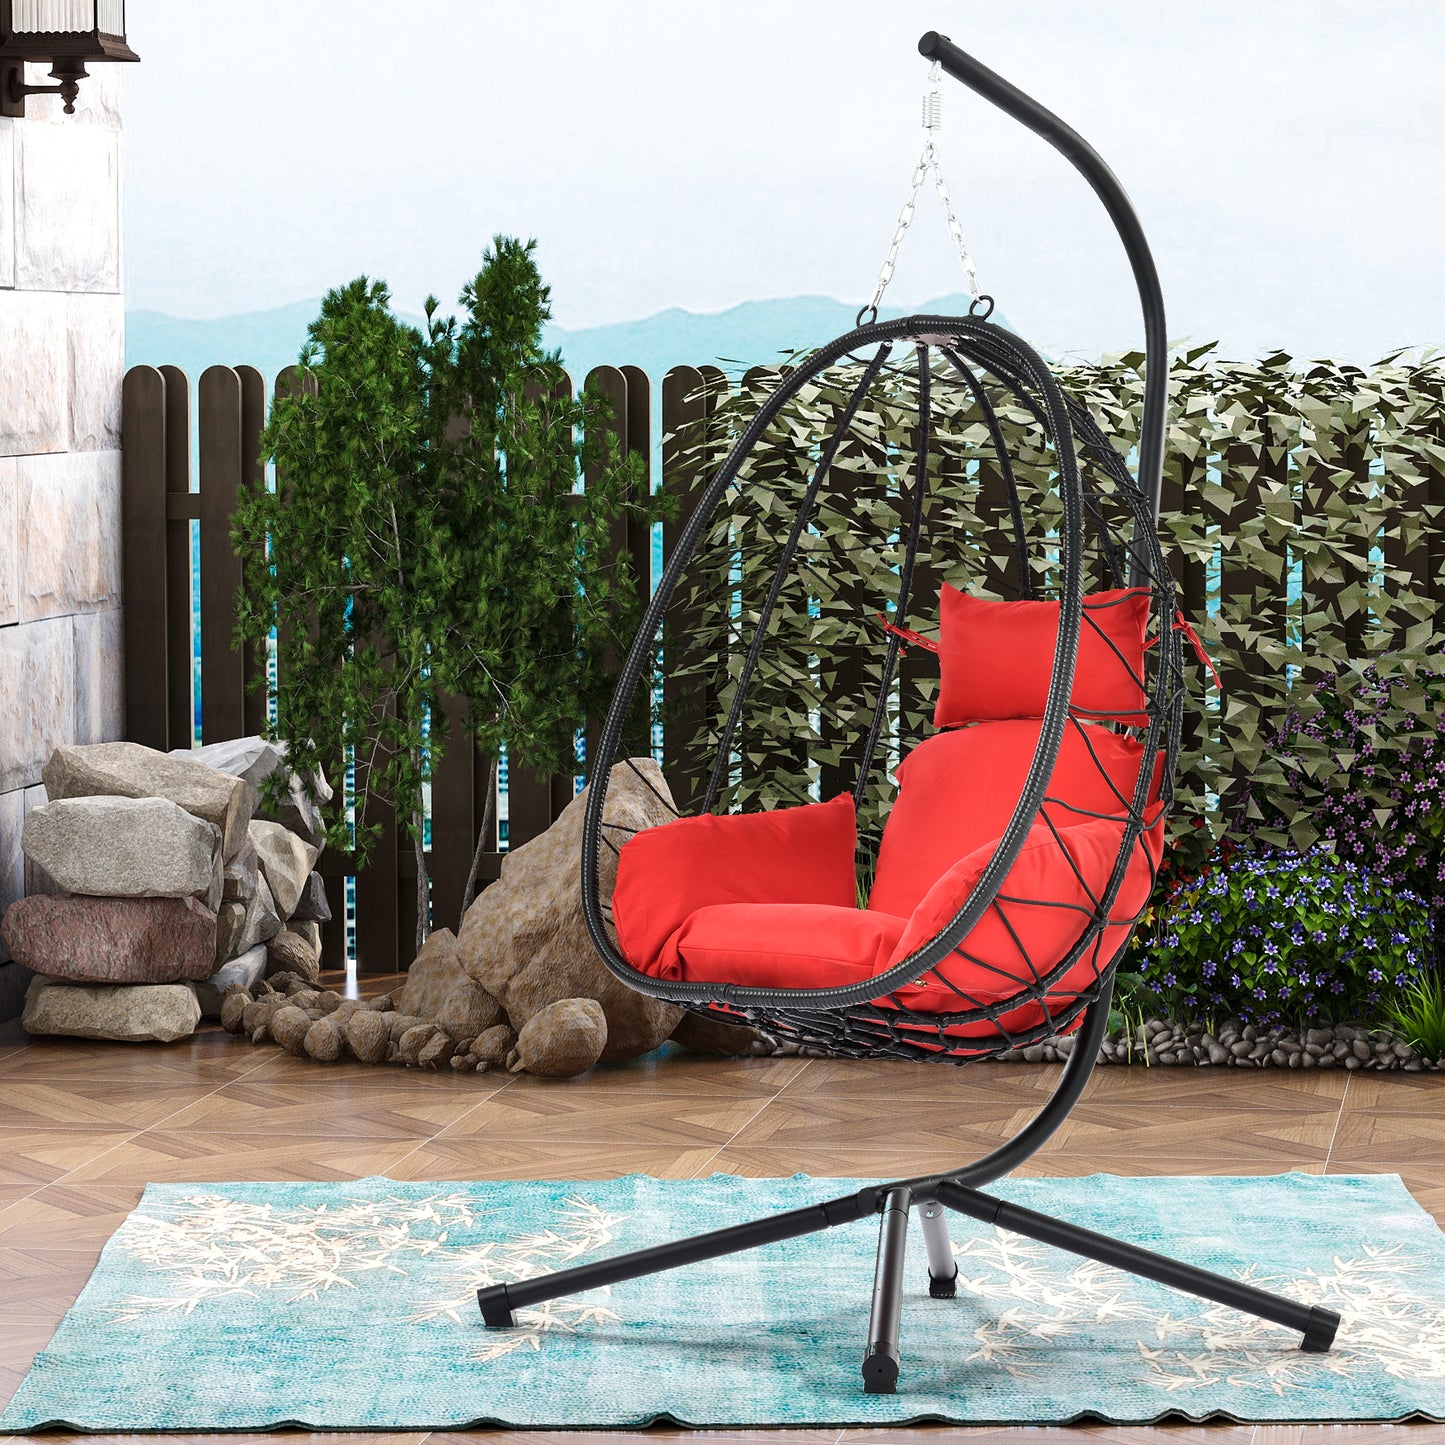 SYNGAR Egg Chair with Stand, Wicker Swing Chair, Patio Hammock Chair with Soft Cushion, Indoor Outdoor Balcony Bedroom Basket Hanging Lounge Chair, Heavy Duty Frame for 300 lbs Capacity, Red, Y024